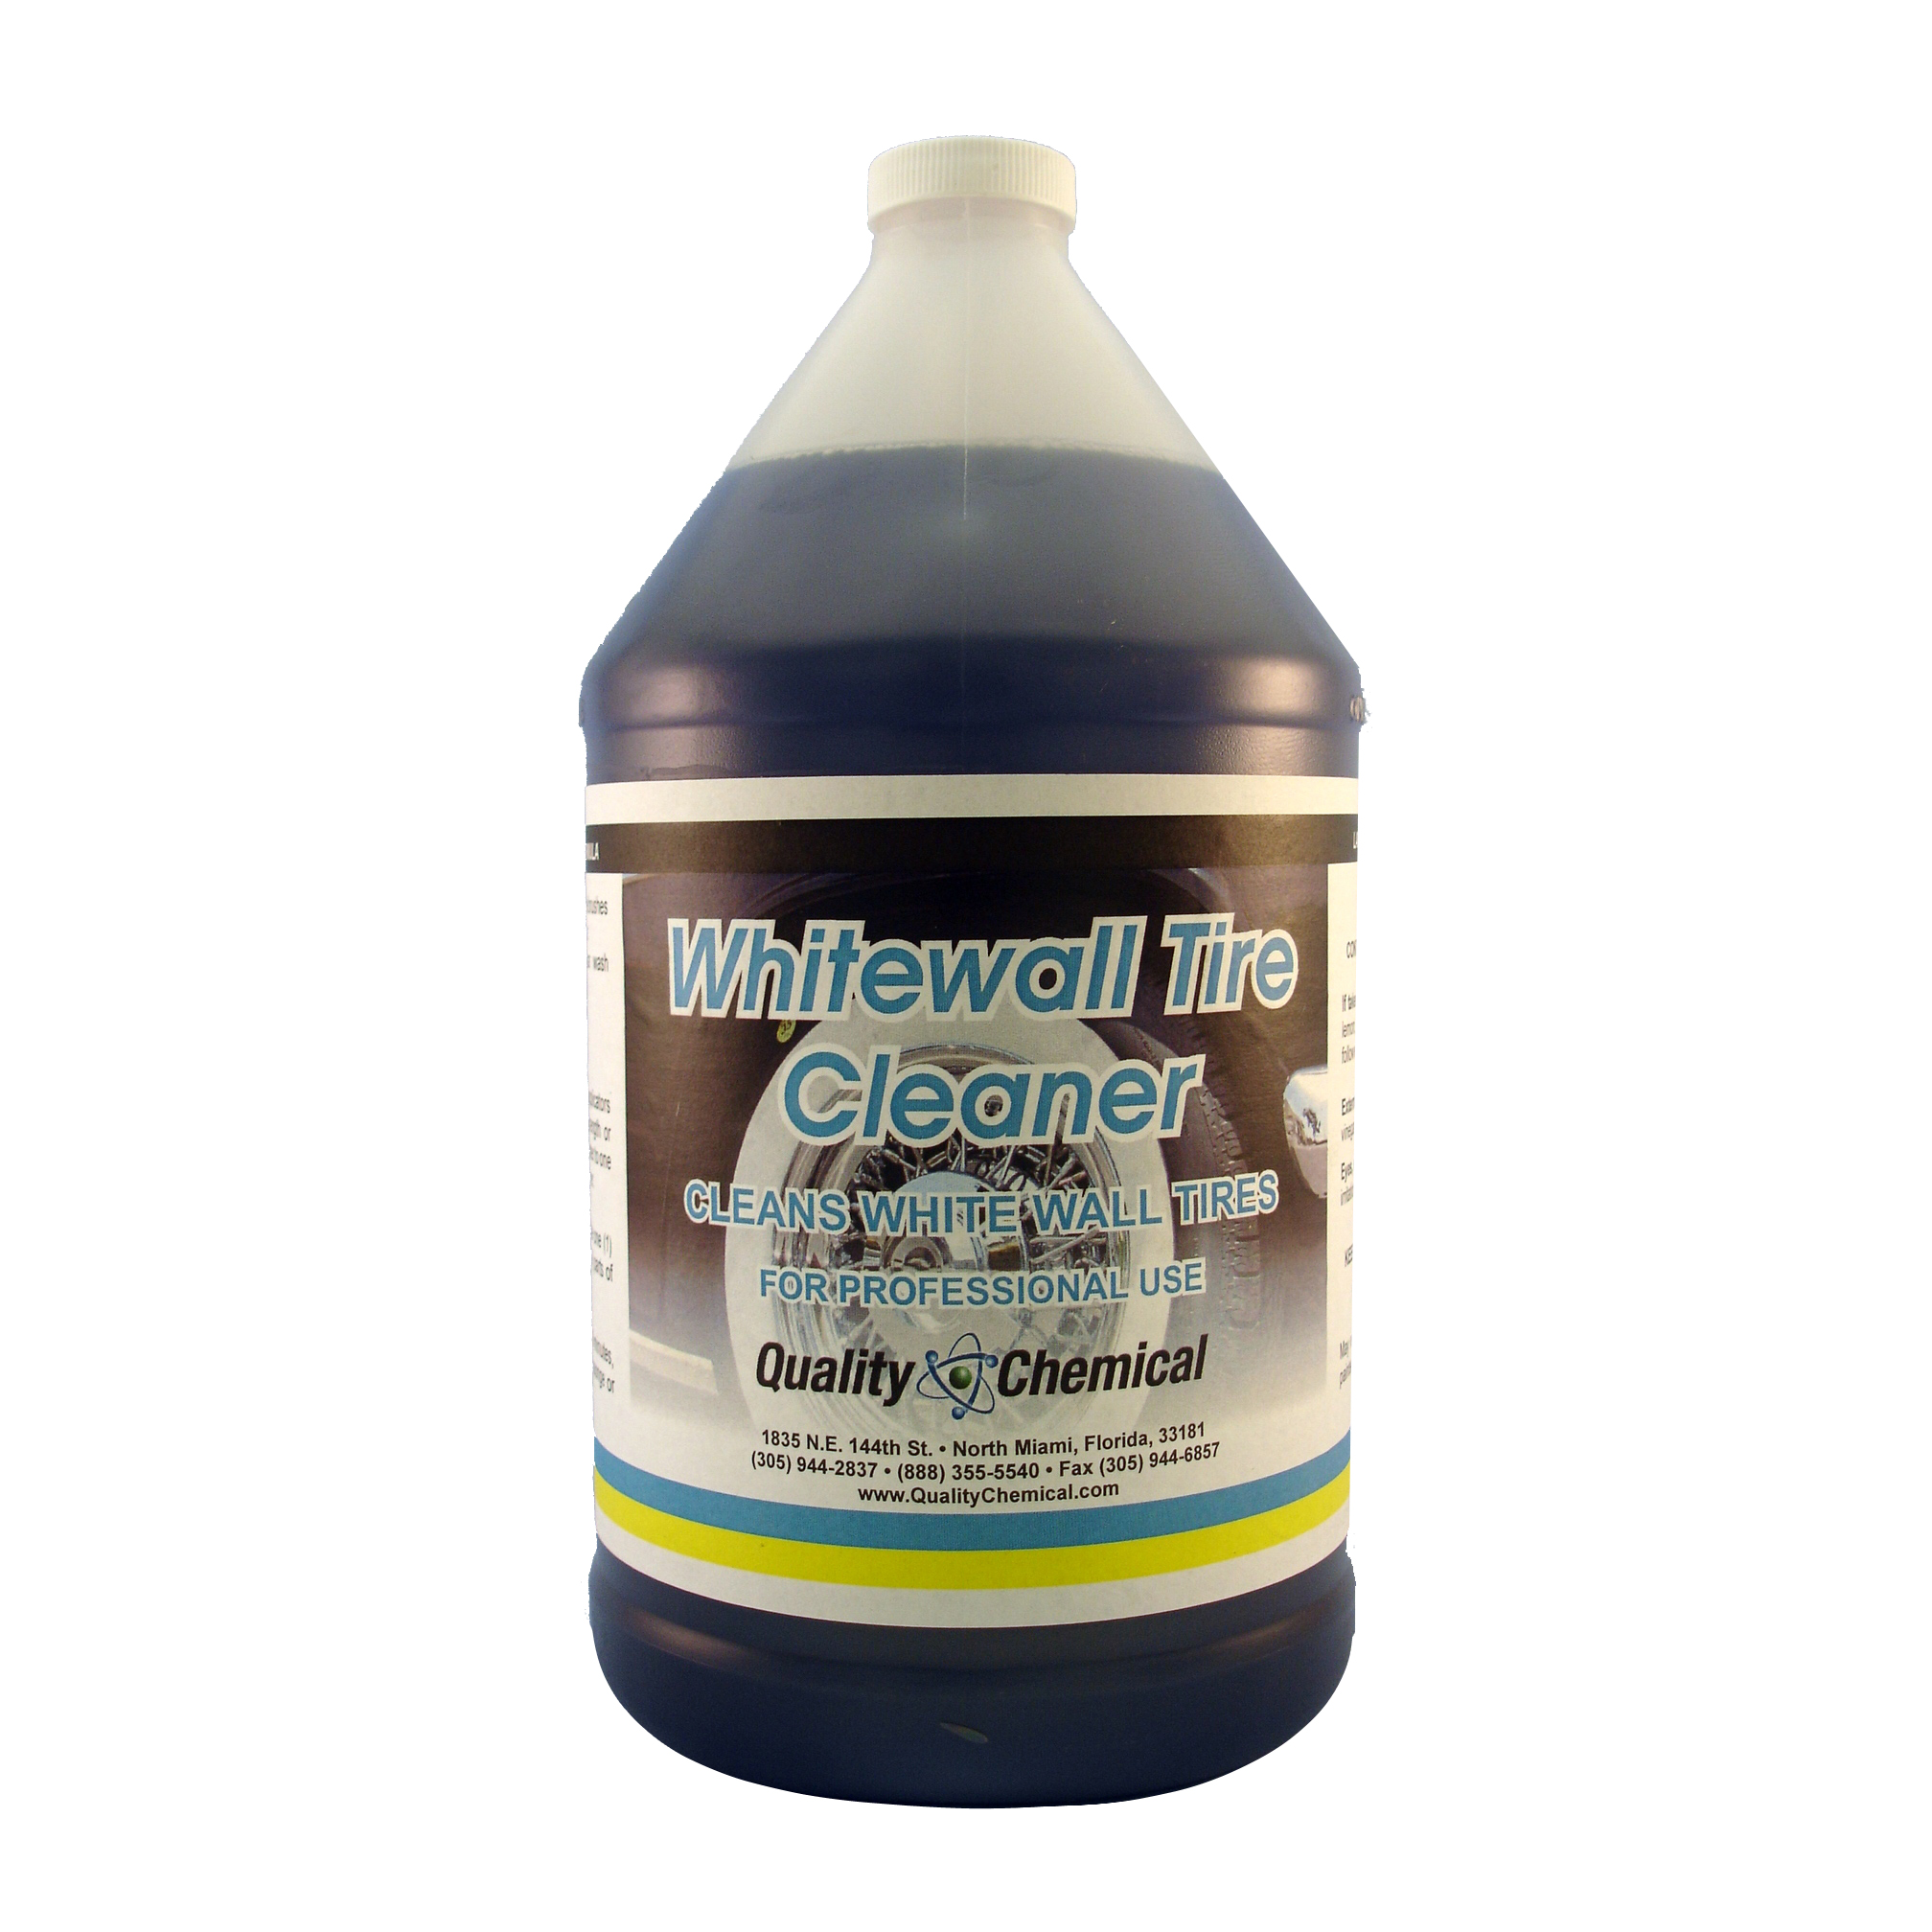 Quality Chemical Company - Whitewall Tire Cleaner